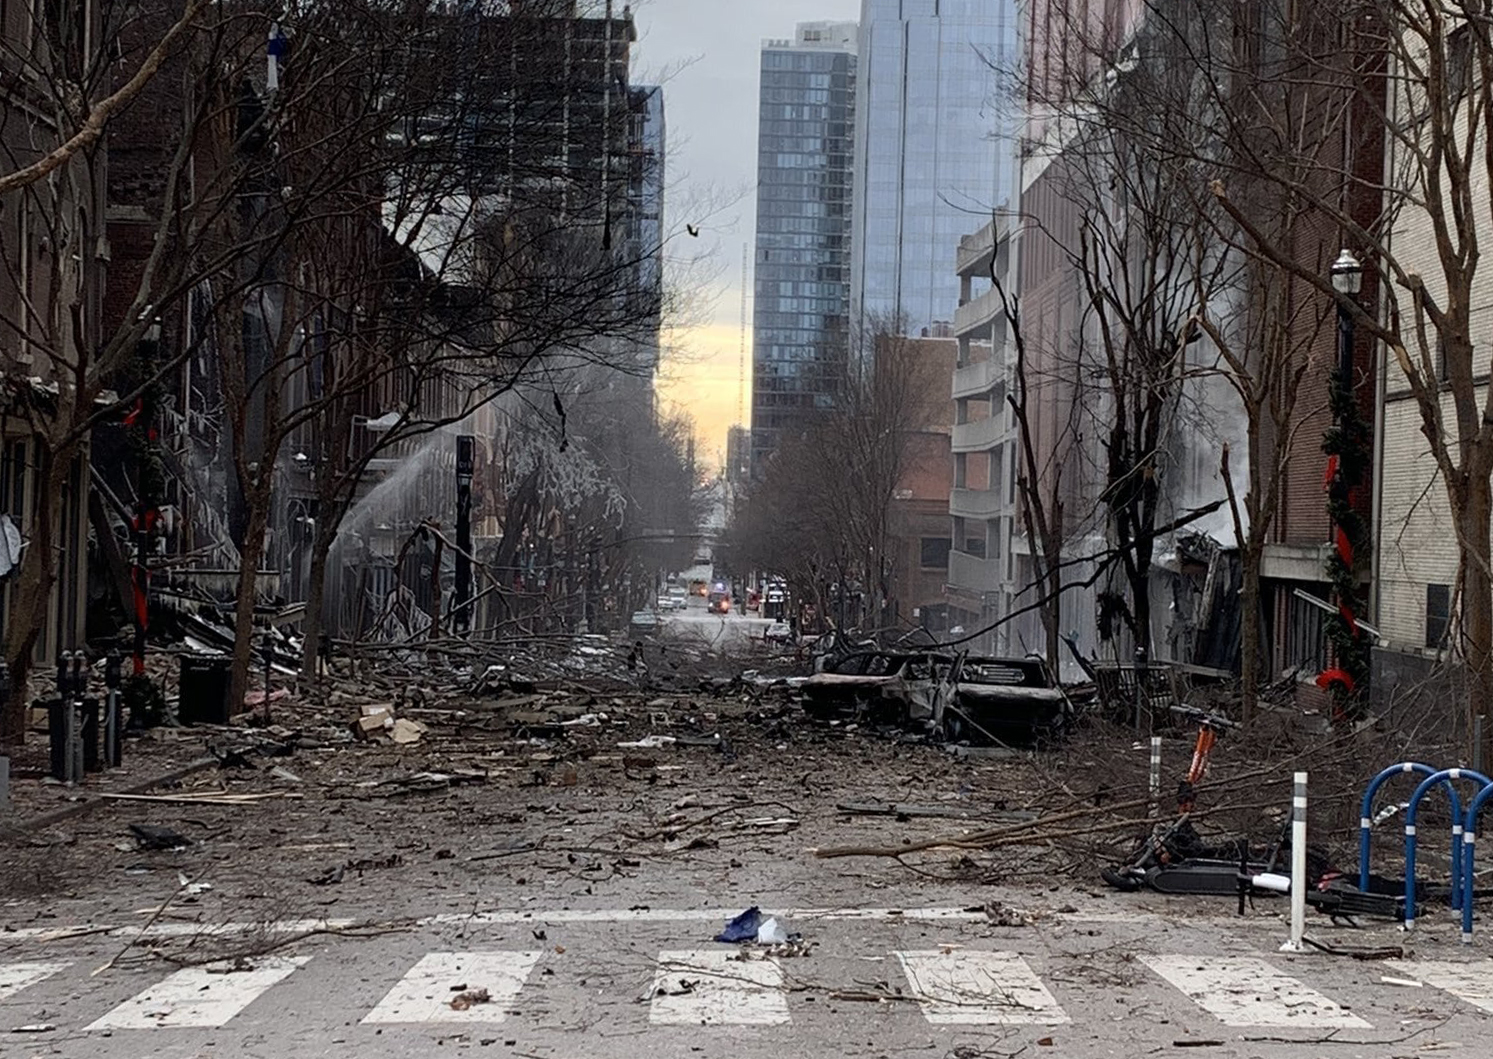 PHOTO: In this photo from the Twitter page of the Nashville Fire Department, damage is seen on a street after an explosion in Nashville, Tenn., on Dec. 25, 2020.